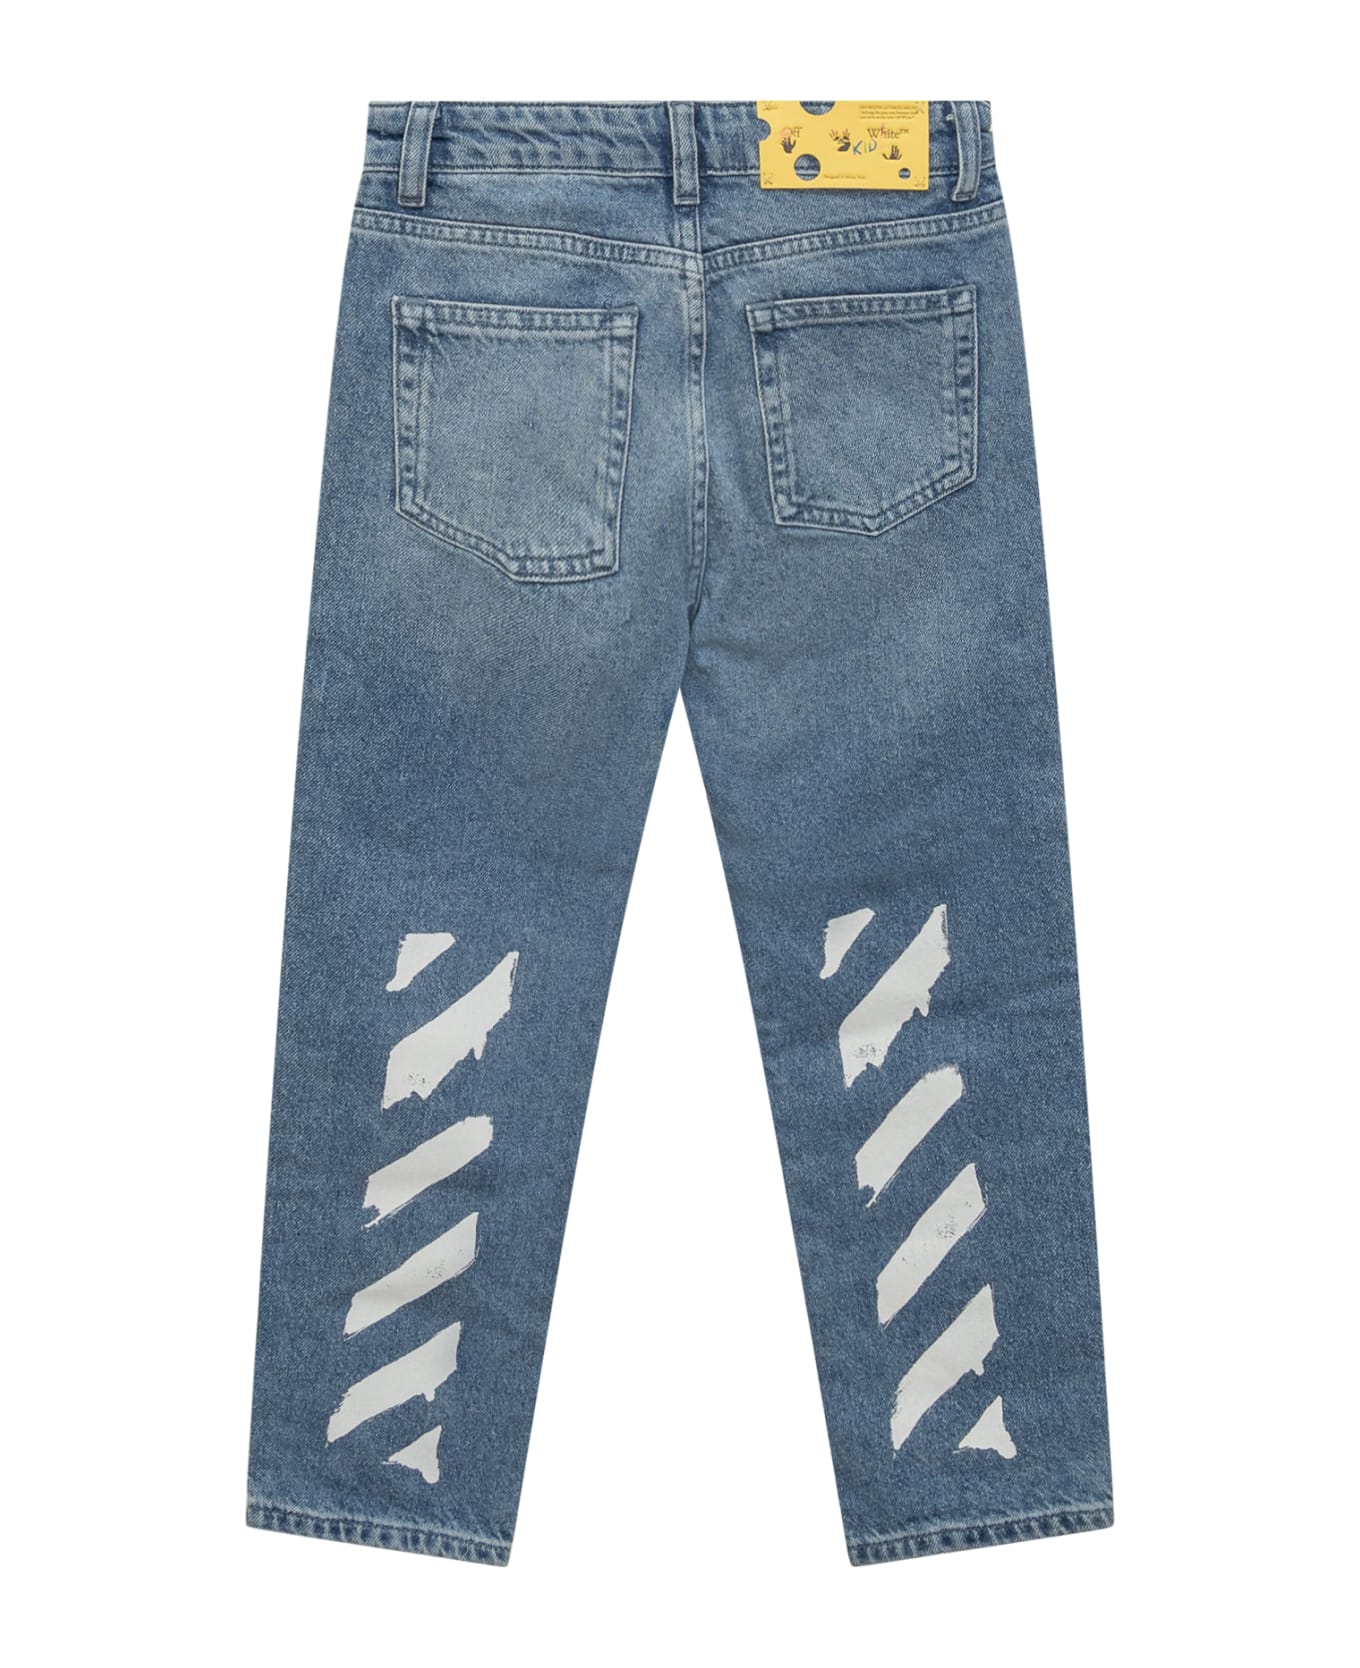 Off-White Paint Graphic Jeans - NAVY